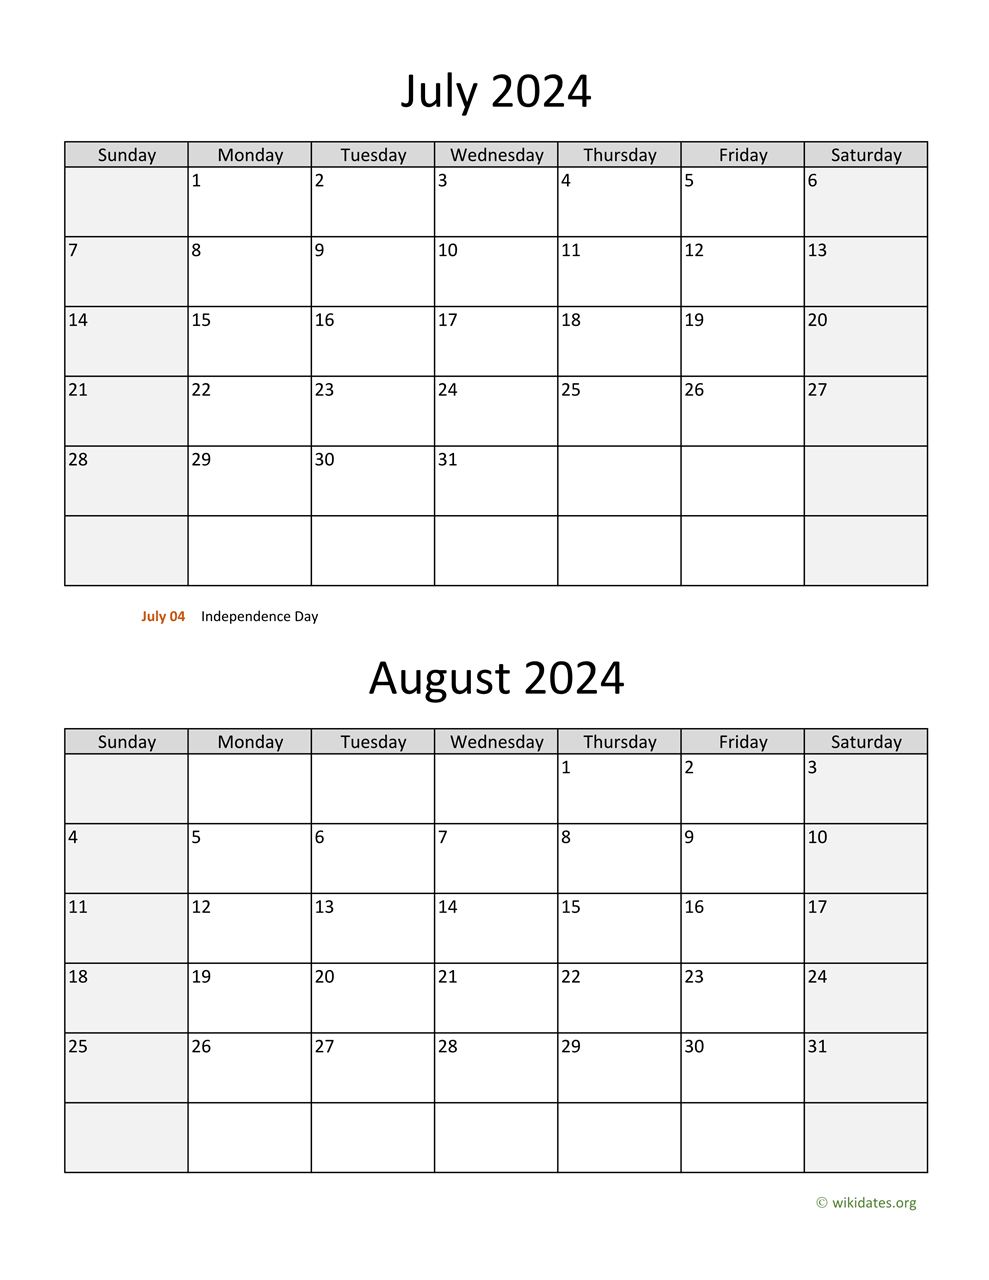 July And August 2024 Calendar | Wikidates for July August 2024 Calendar Printable